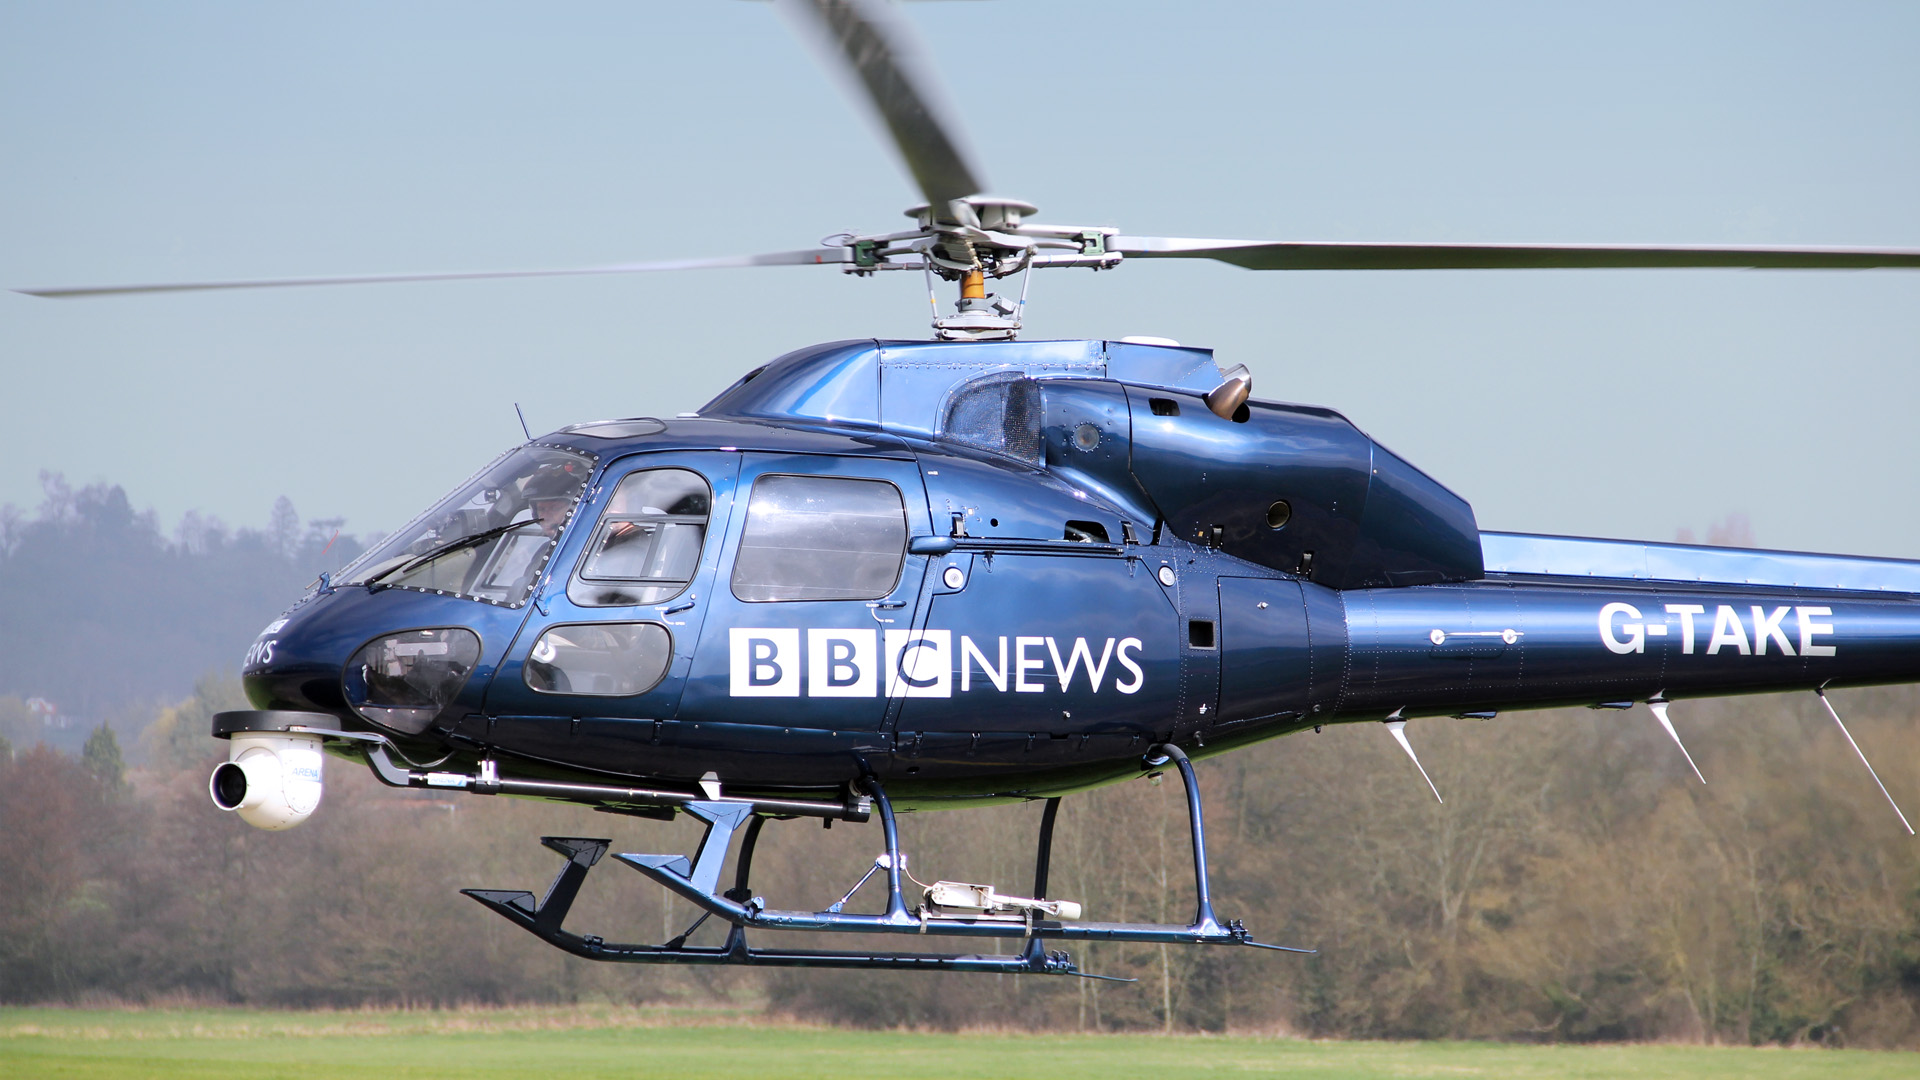 BBC News helicopter owned and operated by Arena Aviation